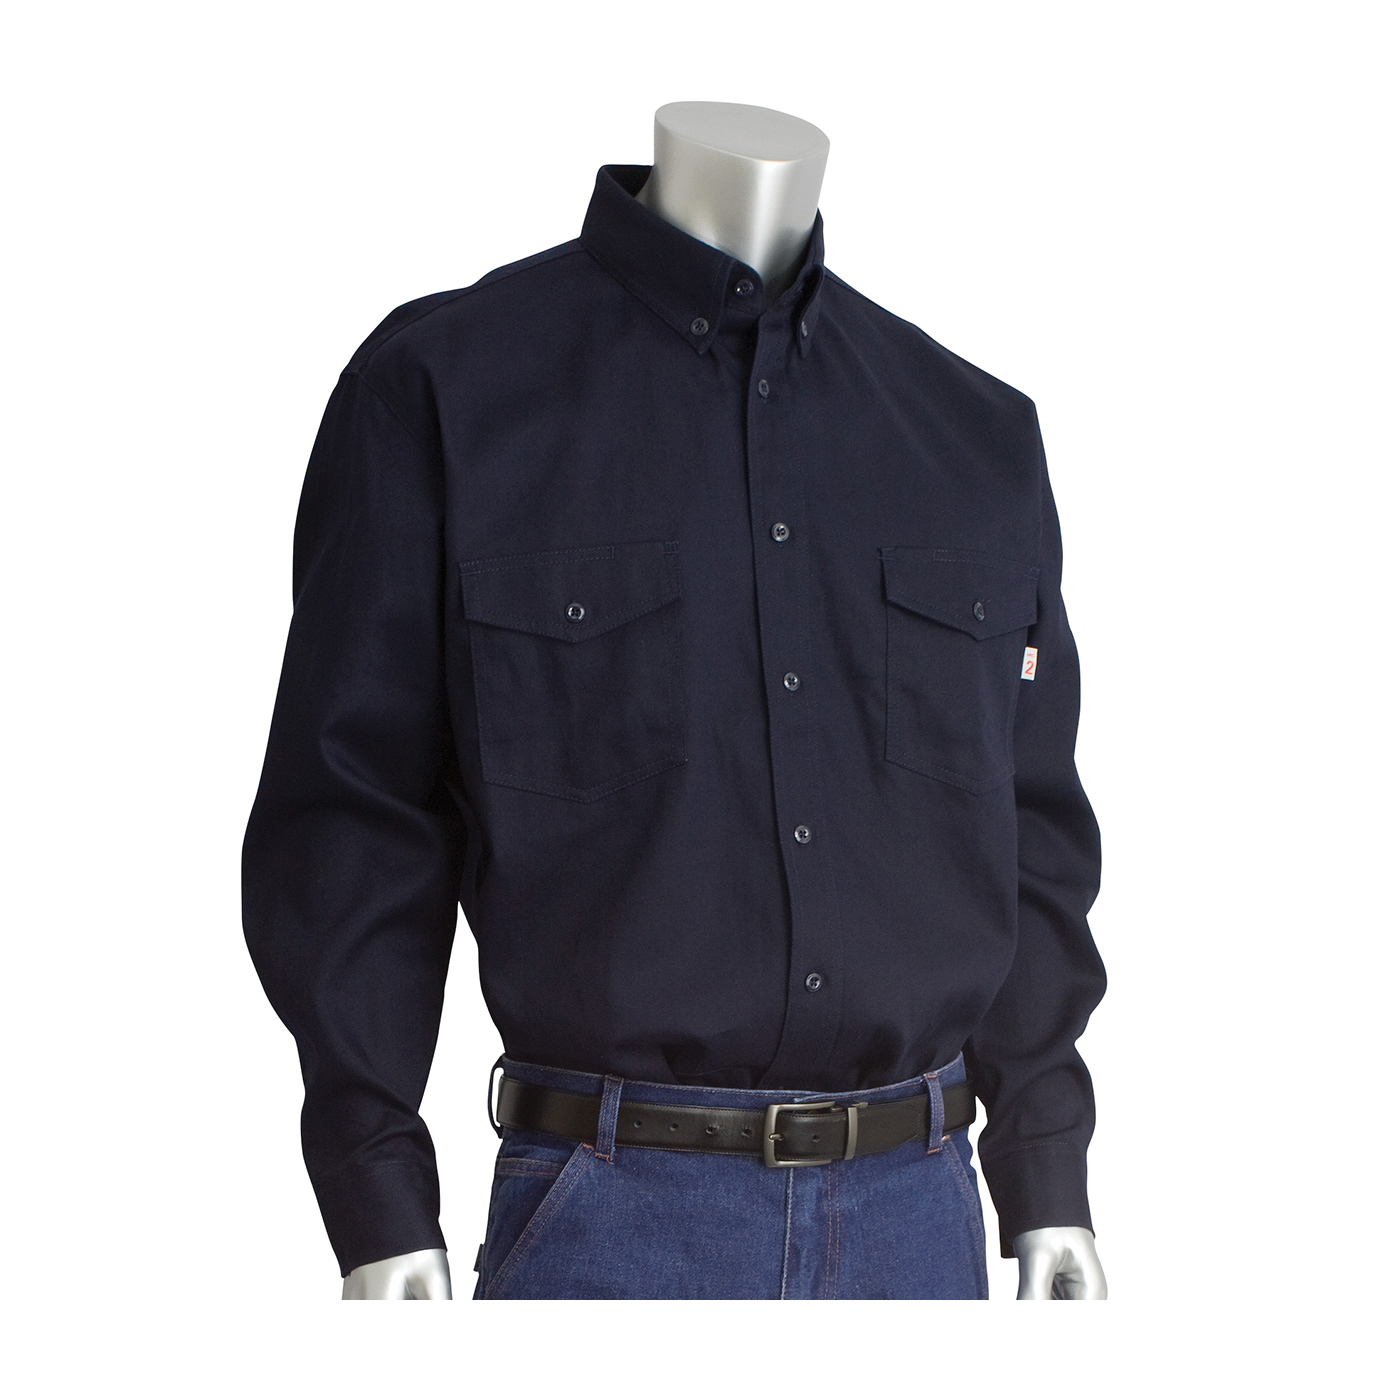 PIP® 385-FRWS-NV/XL Arc and Flame-Resistant Long Sleeve Work Shirt, XL, Navy Blue, 33-1/2 in L, 90% Cotton/10% Nylon